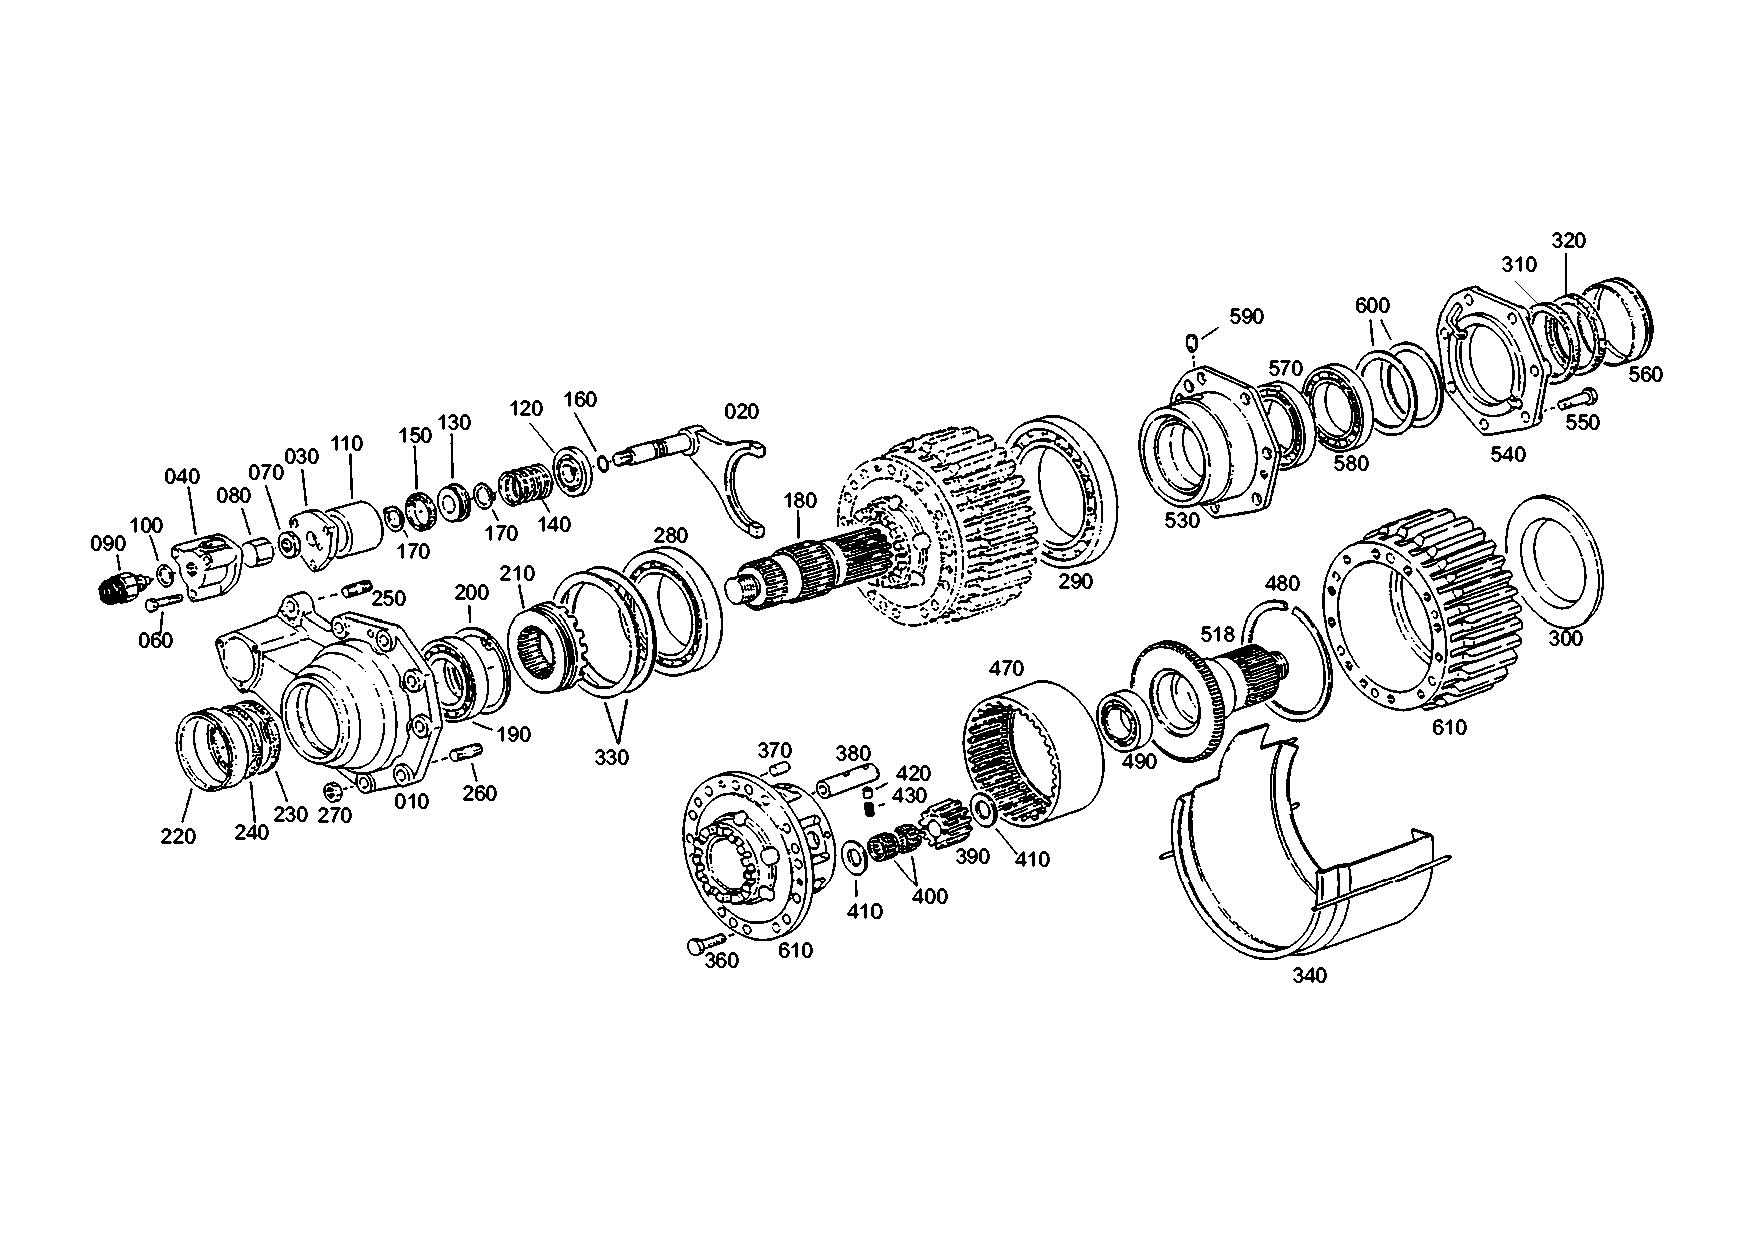 drawing for BELL-SUEDAFRIKA ST20066 - SETTING WASHER (figure 3)